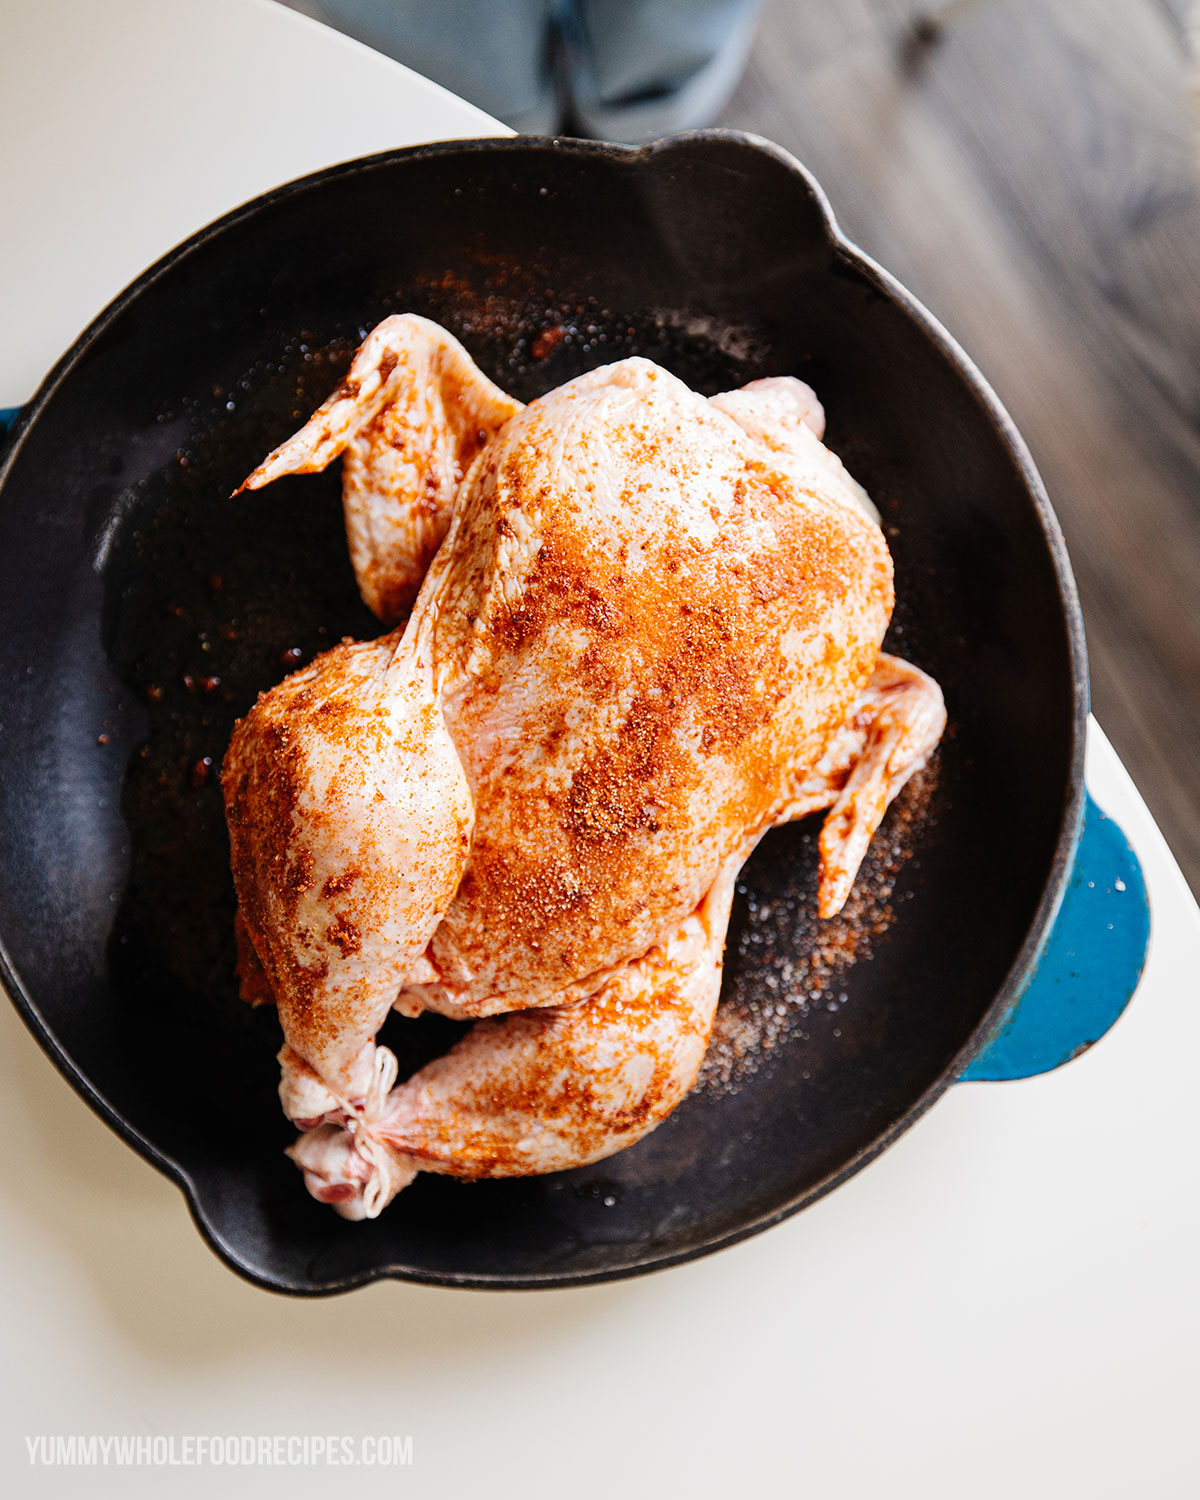 How to roast a chicken so it's juicy & perfect every time